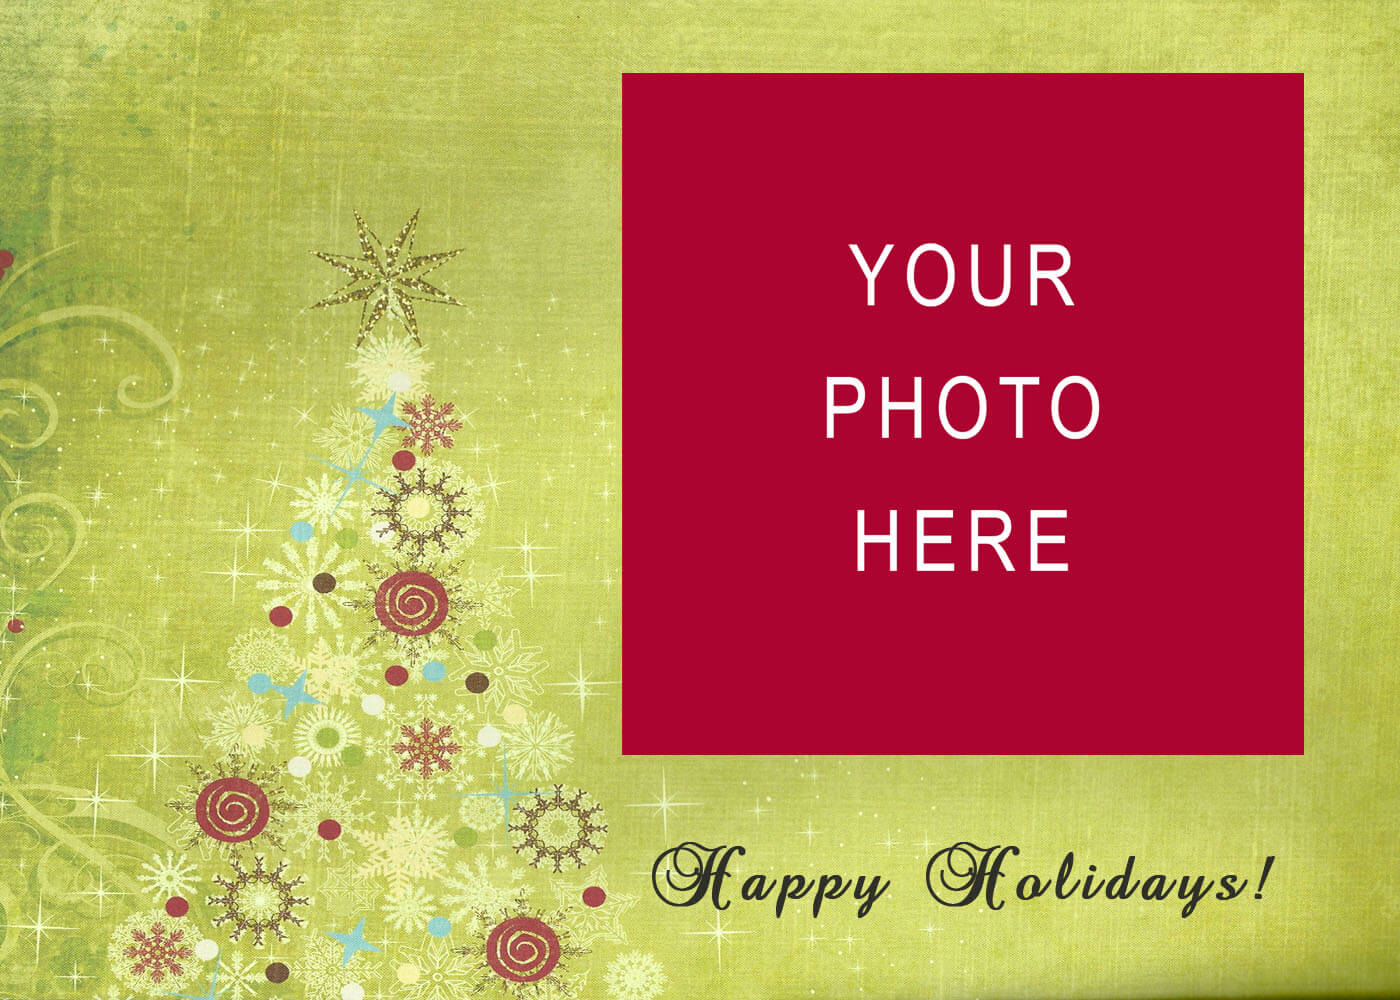 Christmas Greeting Cards Templates Free – Zohre With Regard To Christmas Photo Cards Templates Free Downloads